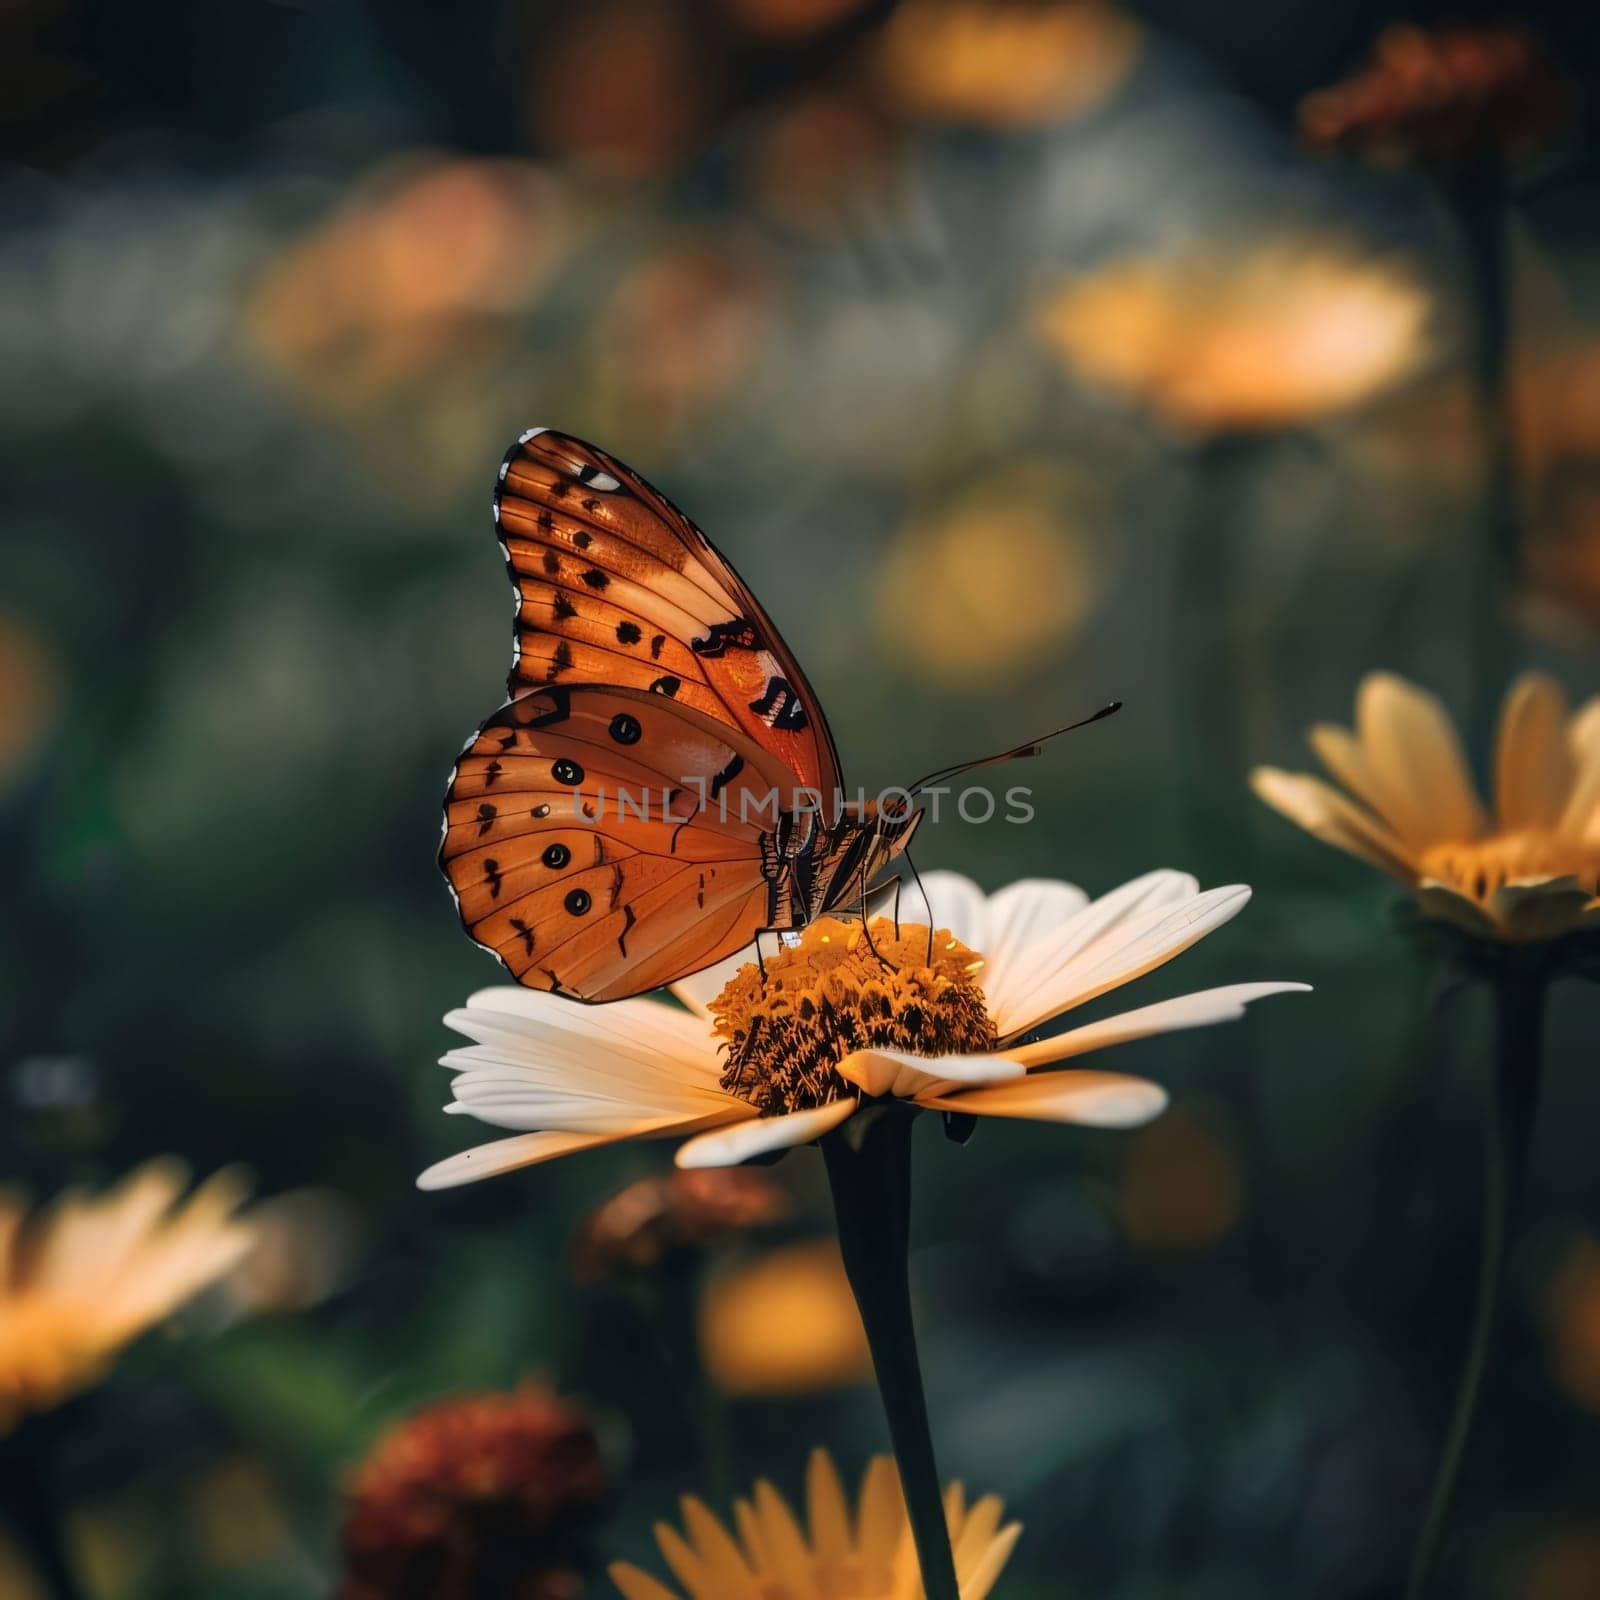 Orange and black butterfly sitting on a white flower, blurred background. Flowering flowers, a symbol of spring, new life. A joyful time of nature awakening to life.